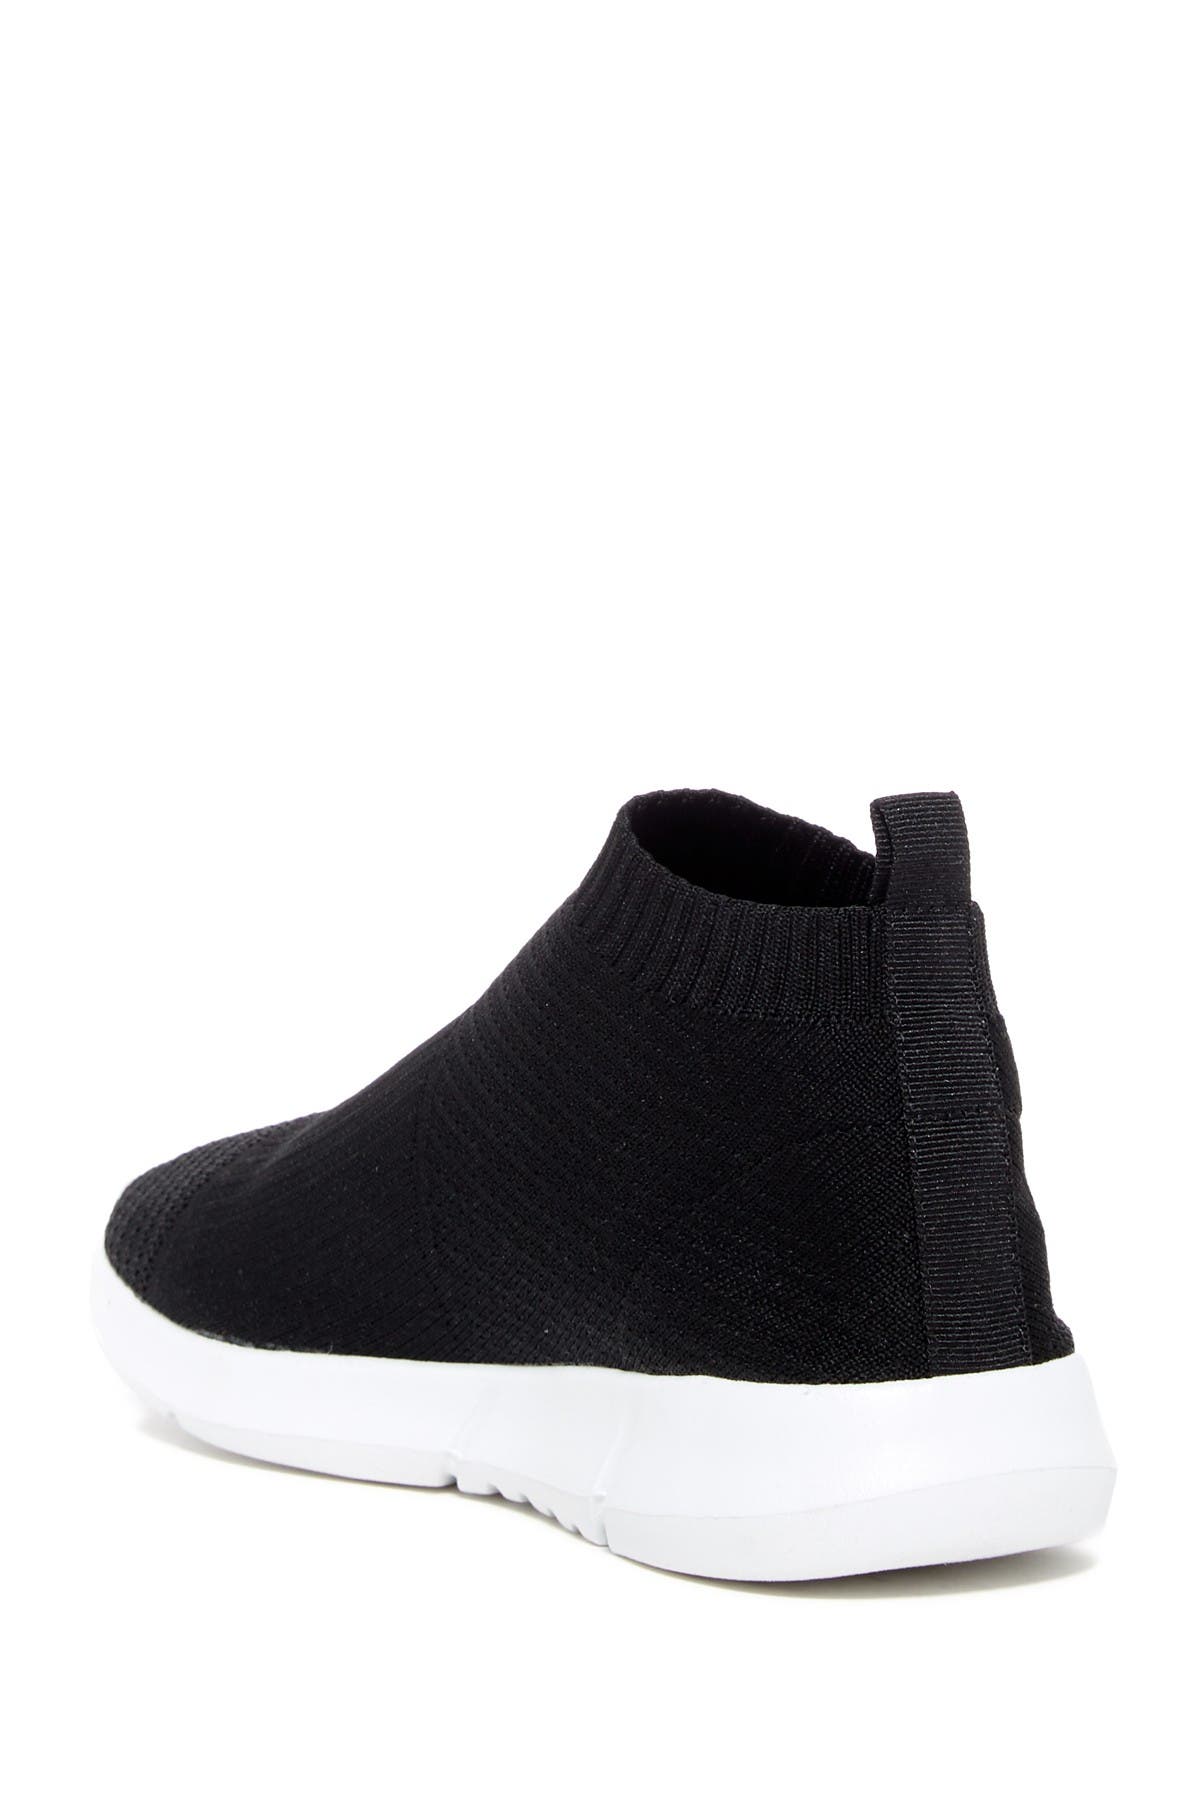 steve madden stretch sneakers